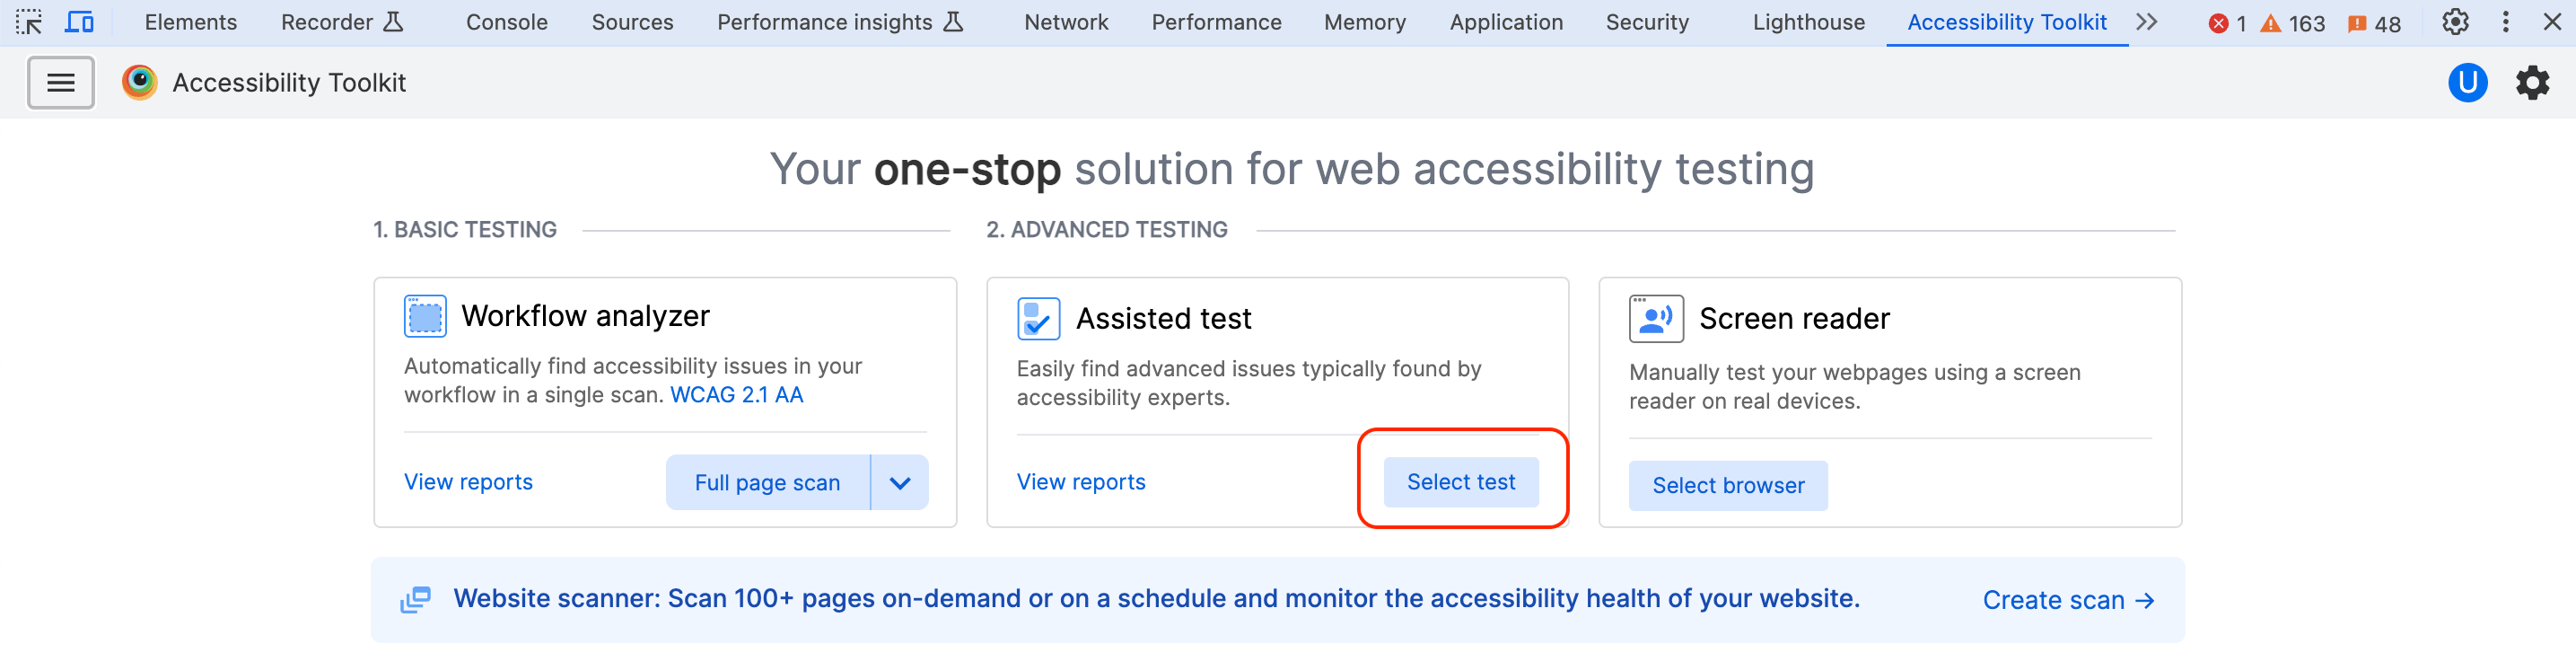 Click Select test to open an assisted test